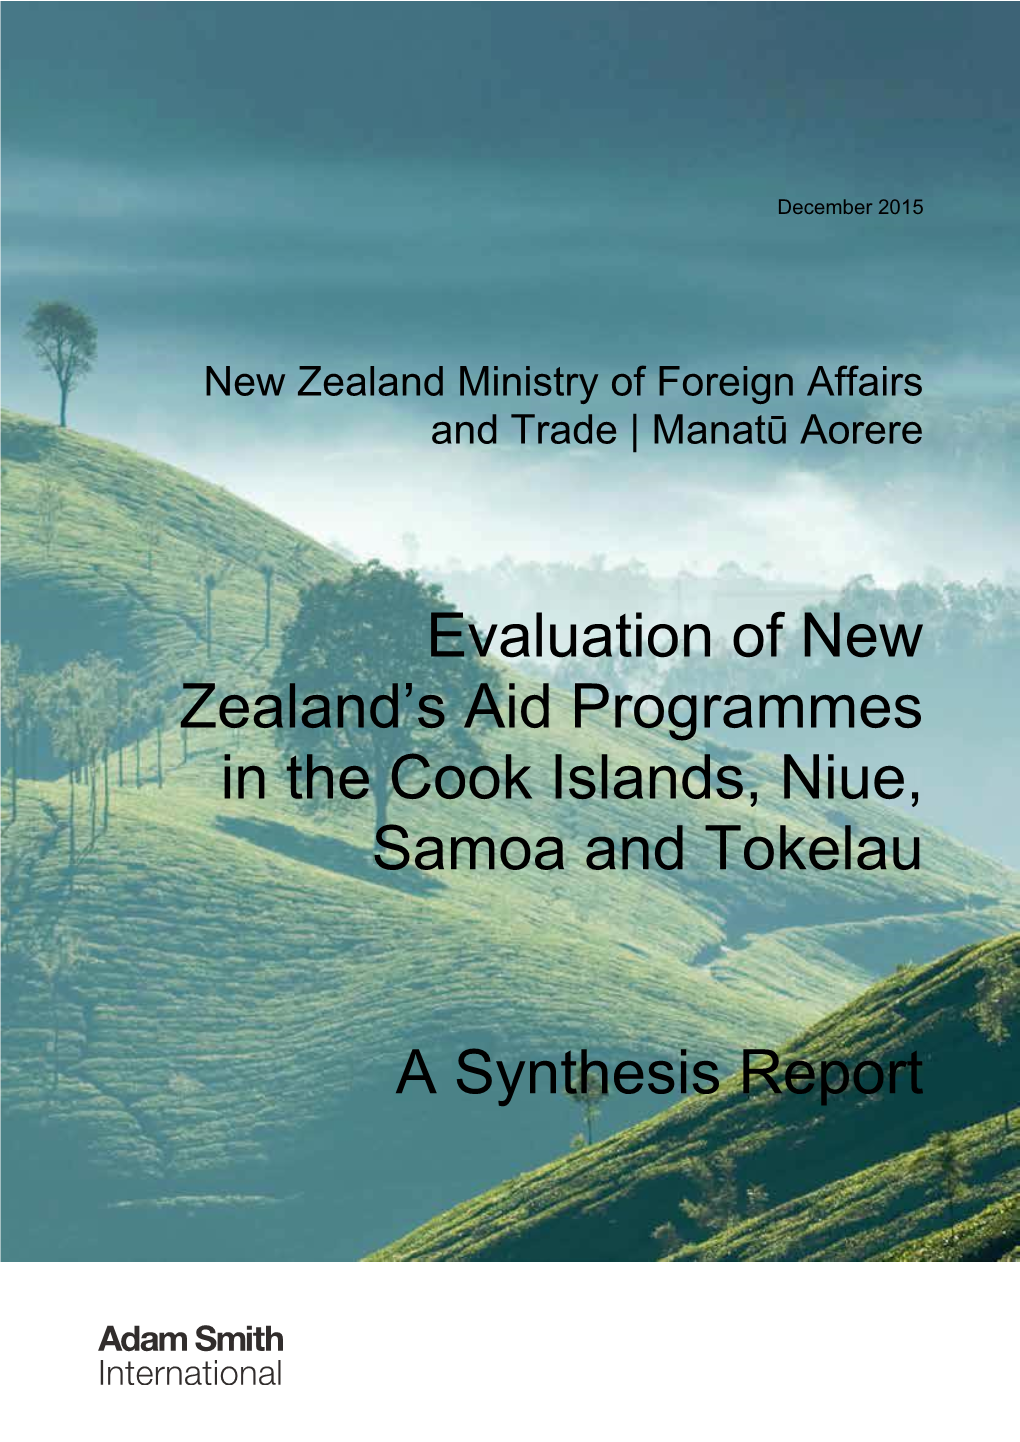 Evaluation of New Zealand's Aid Programmes in the Cook Islands